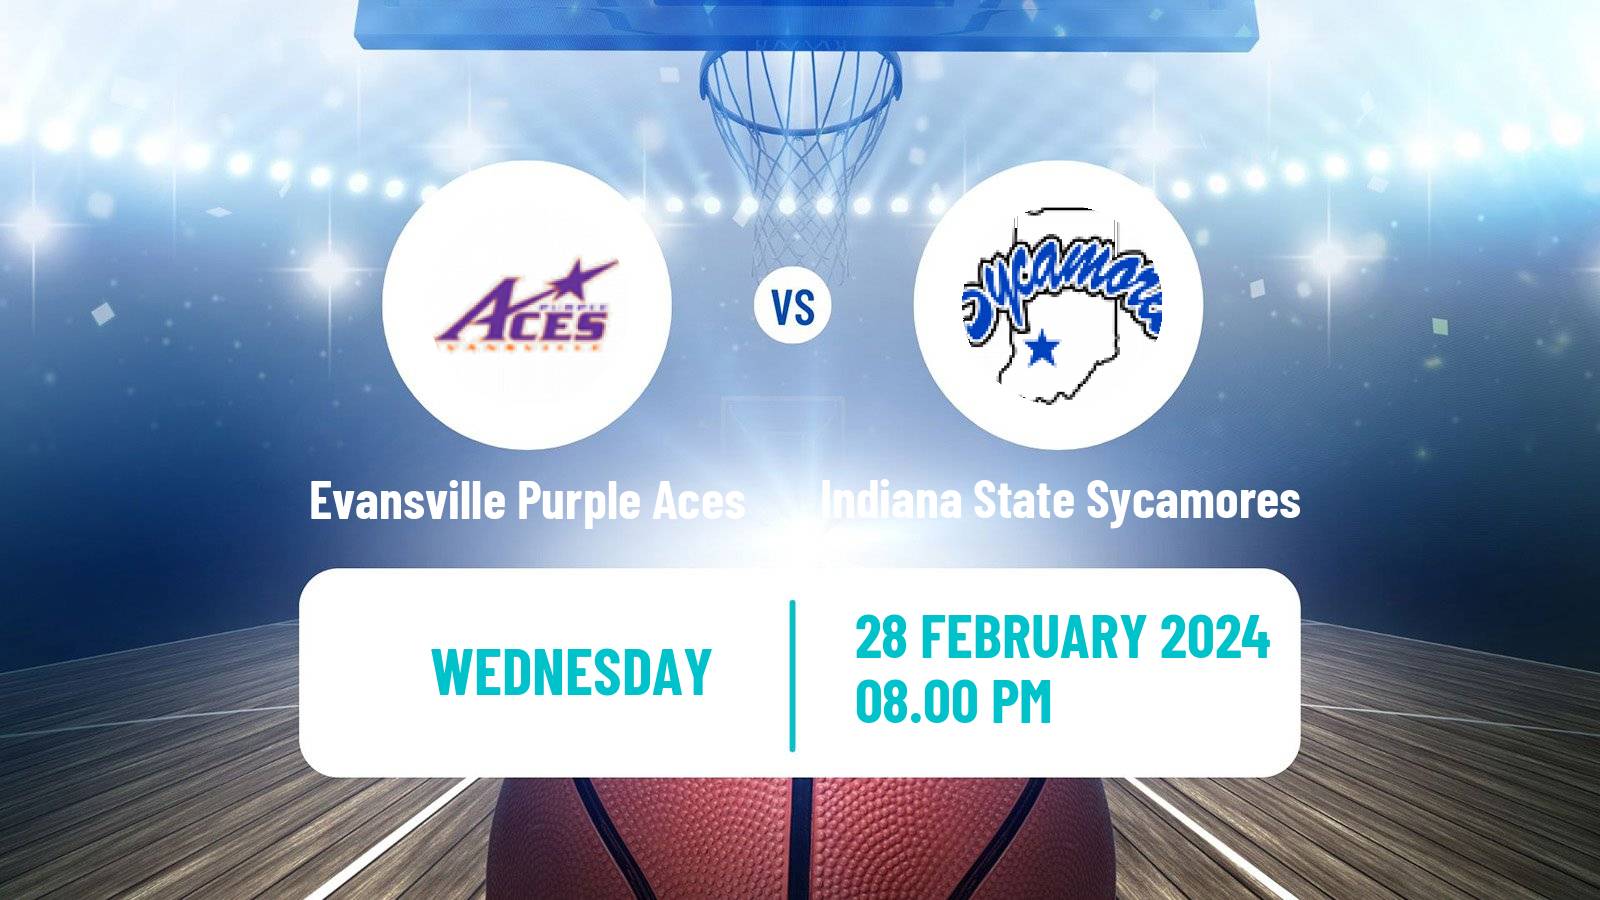 Basketball NCAA College Basketball Evansville Purple Aces - Indiana State Sycamores